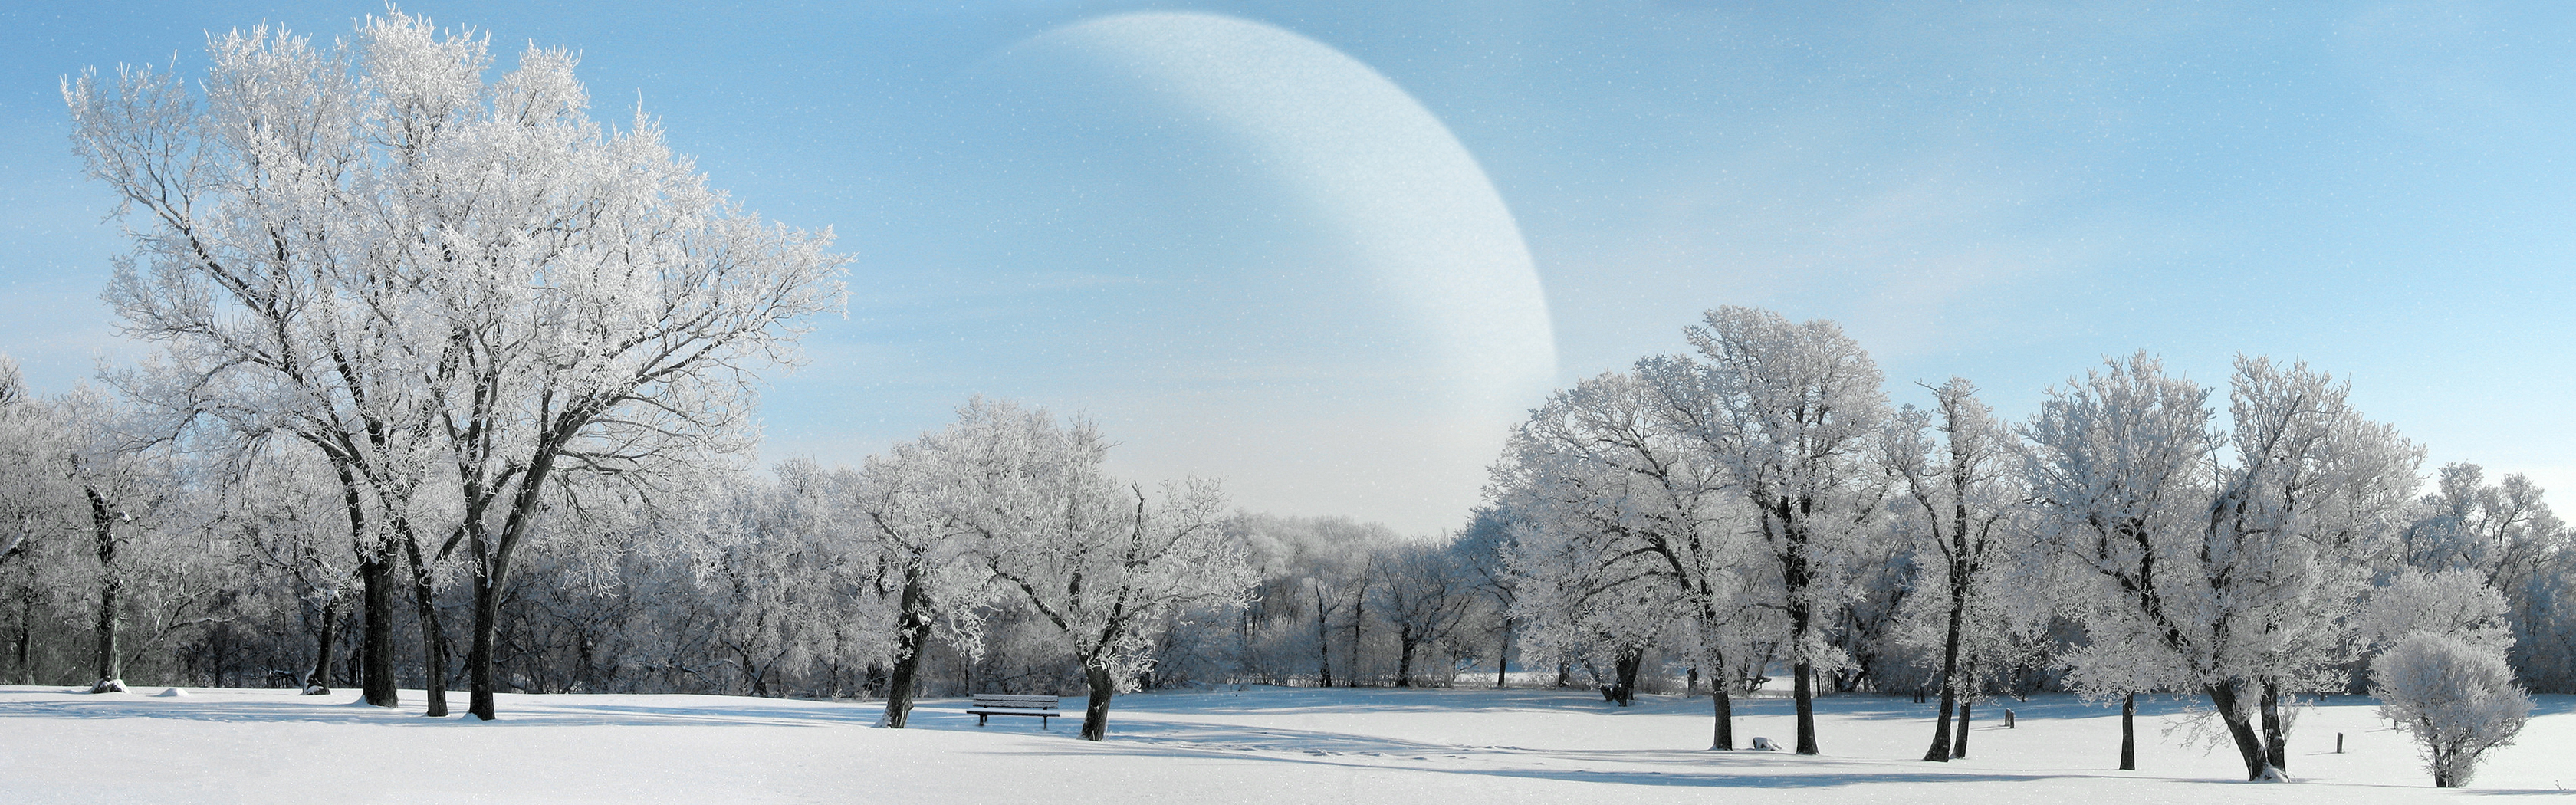 wallpapers winter, earth, a dreamy world, landscape, planet, snow